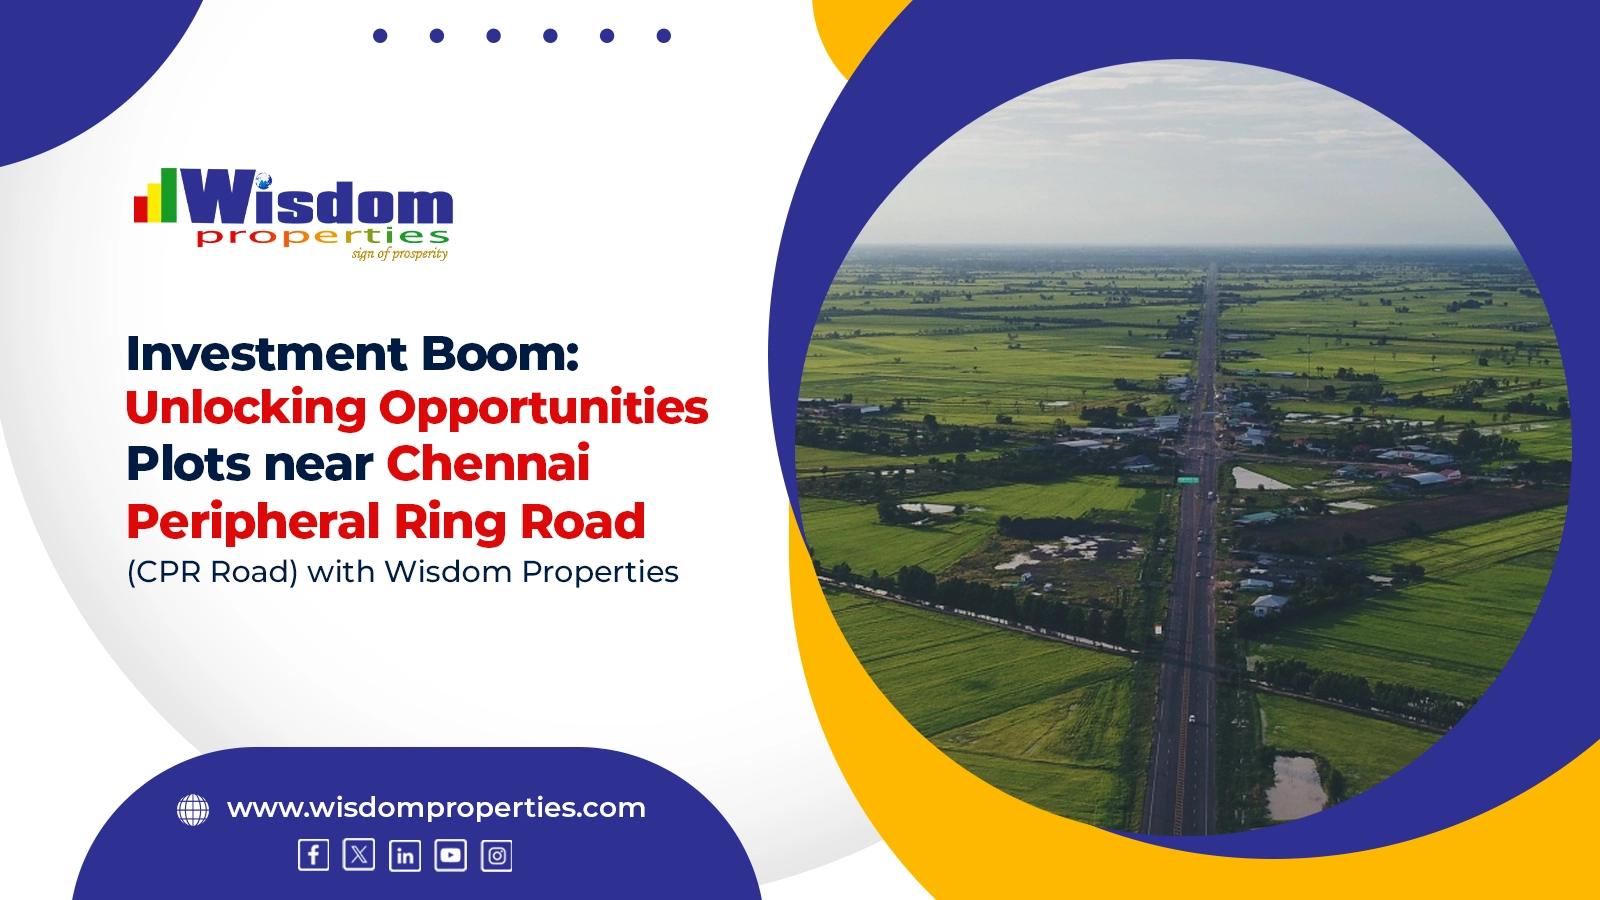 Investment Boom: Unlocking Opportunities Plots near Chennai Peripheral Ring Road (CPR Road) with Wisdom Properties